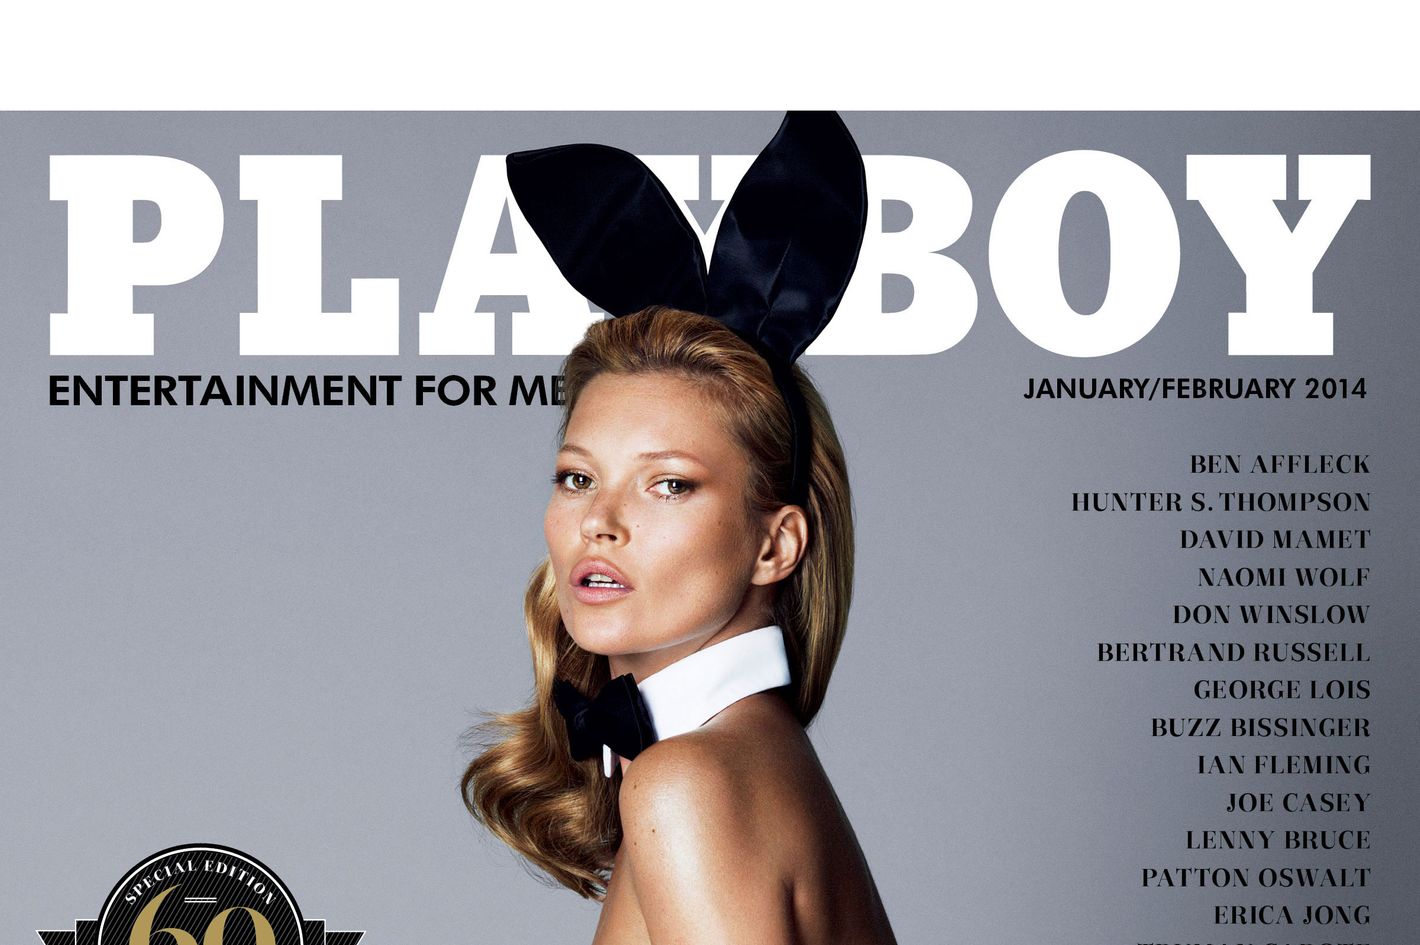 angel cordial recommends playboy full movies online pic